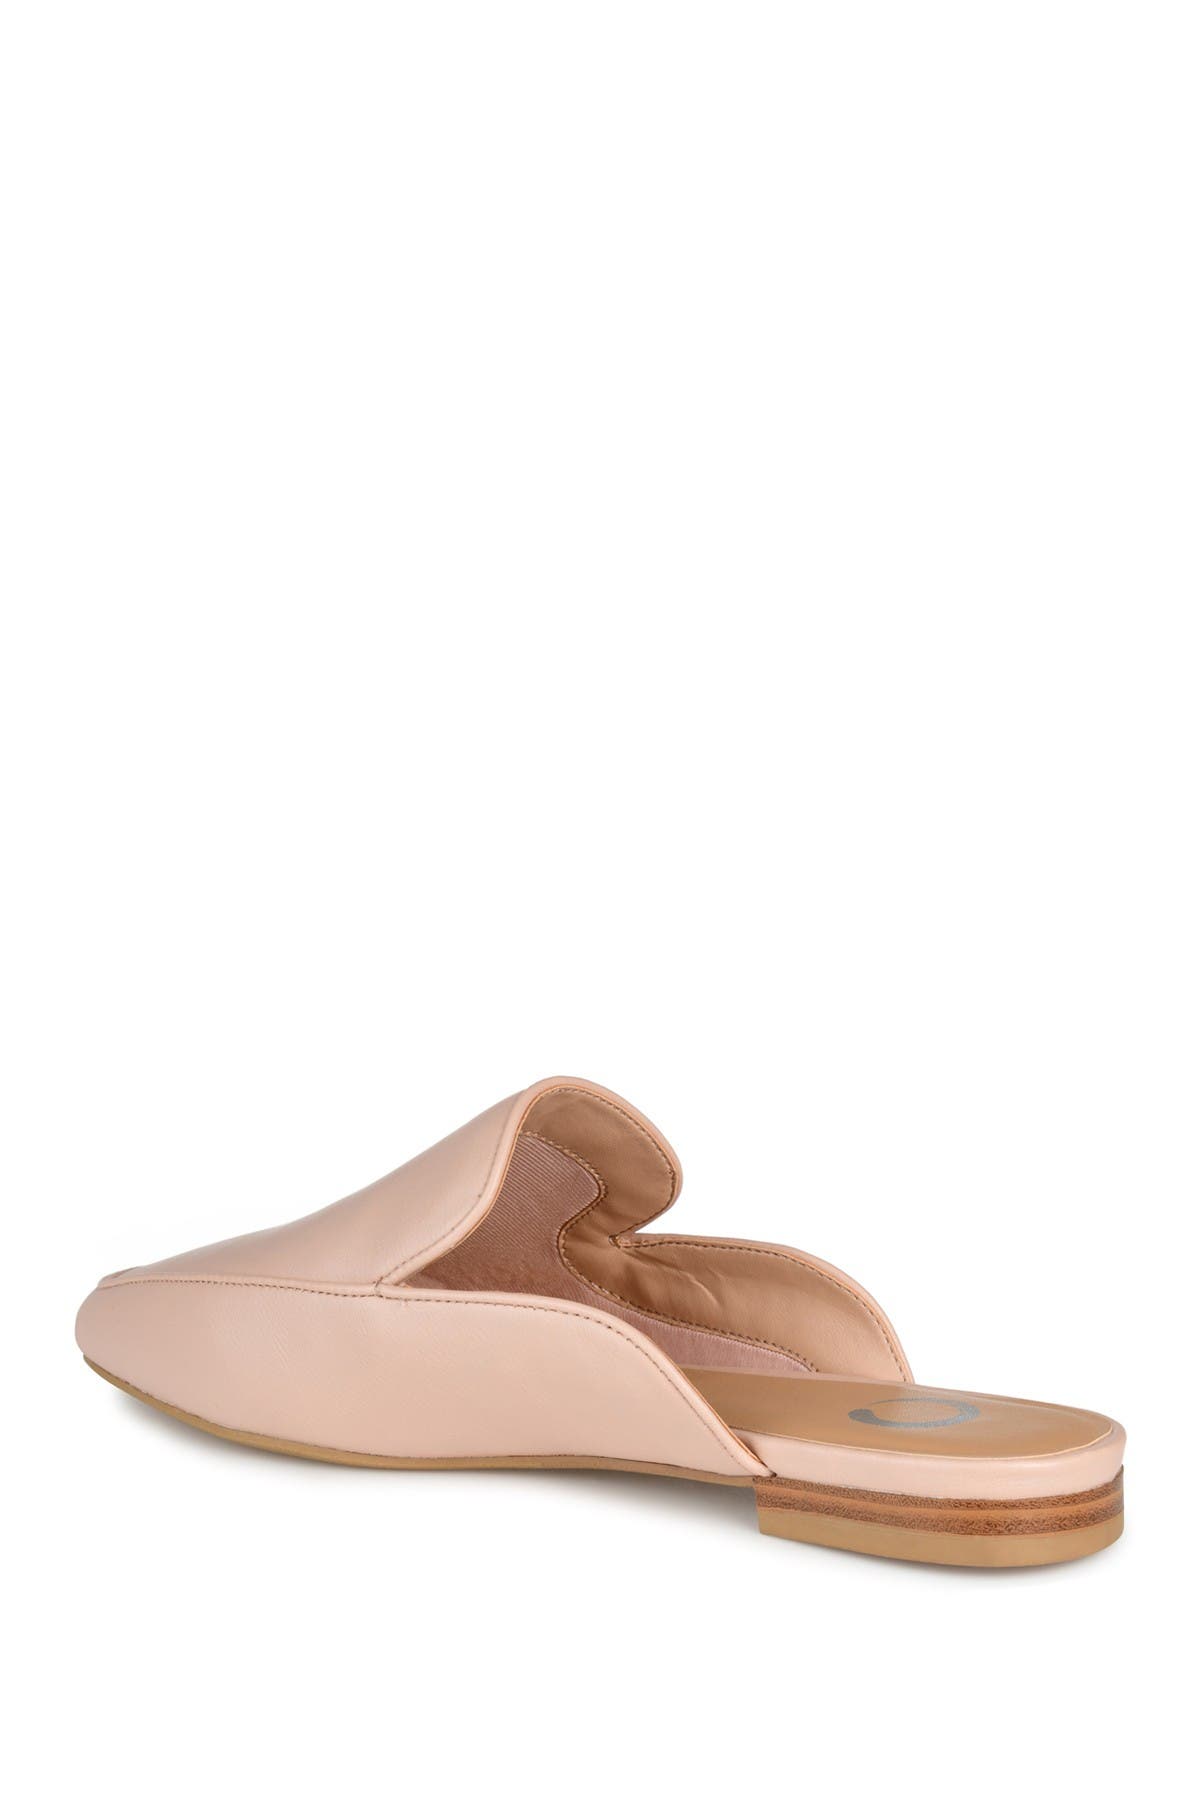 Journee Collection Akza Flat Mule In Light/pastel Pink